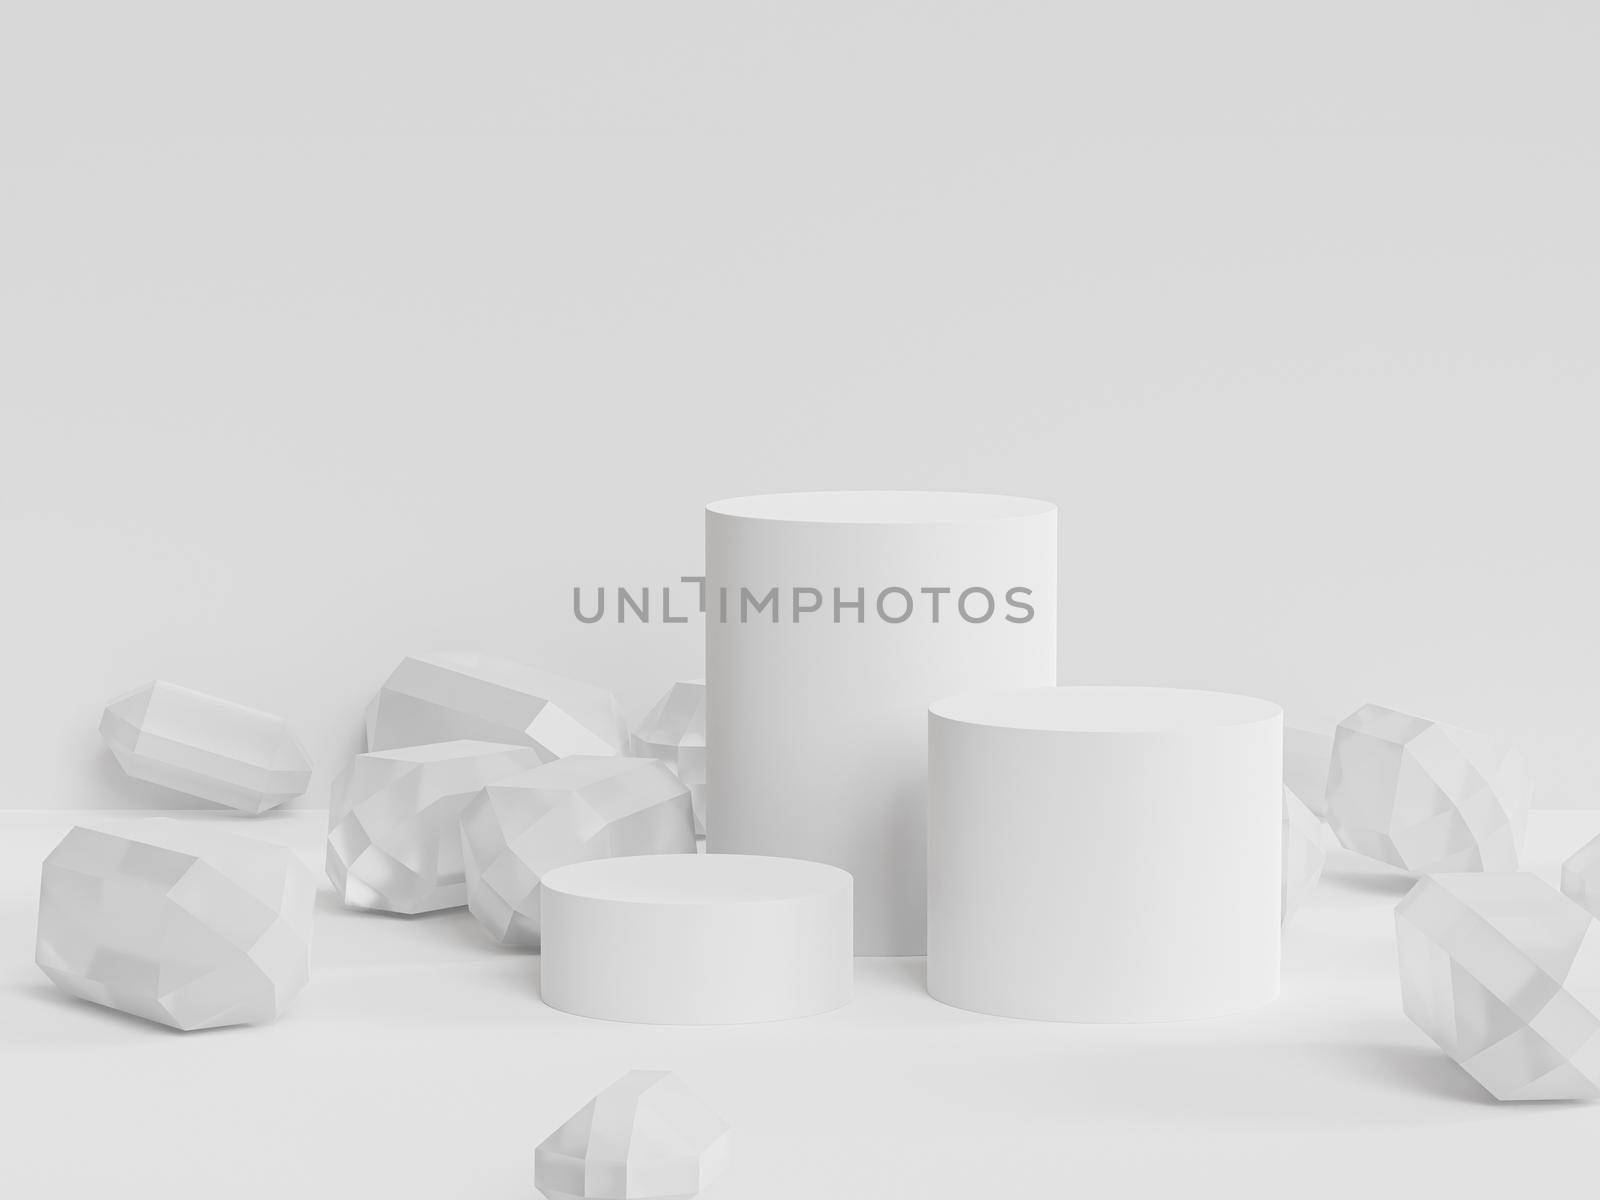 Podiums or pedestals for products or advertising with crystals on white background, minimal 3d render